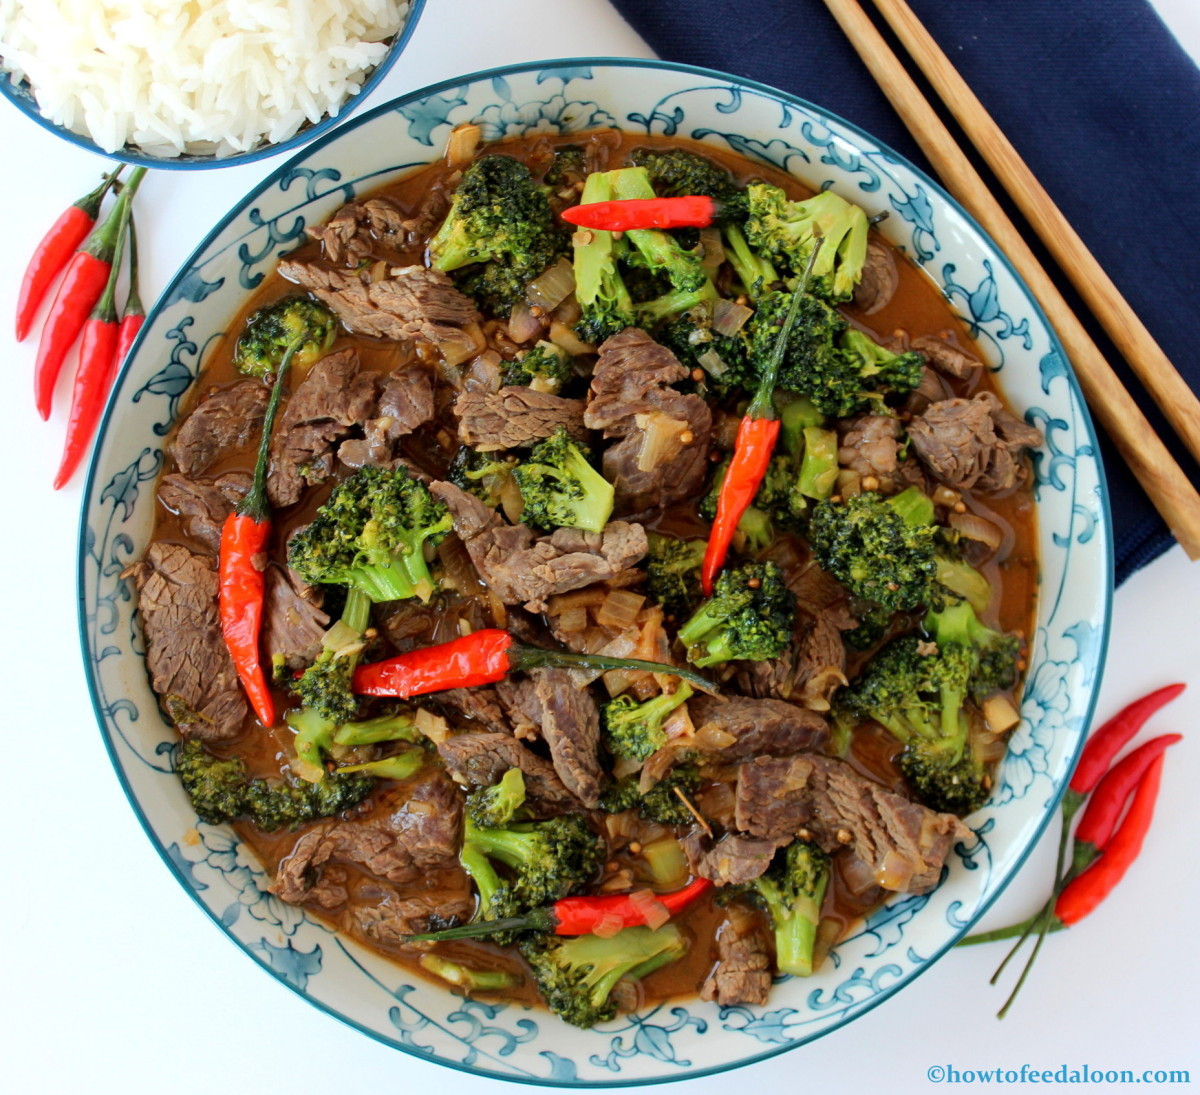 Beef And Broccoli Stir Fry
 Beef and Broccoli Stir Fry How To Feed A Loon